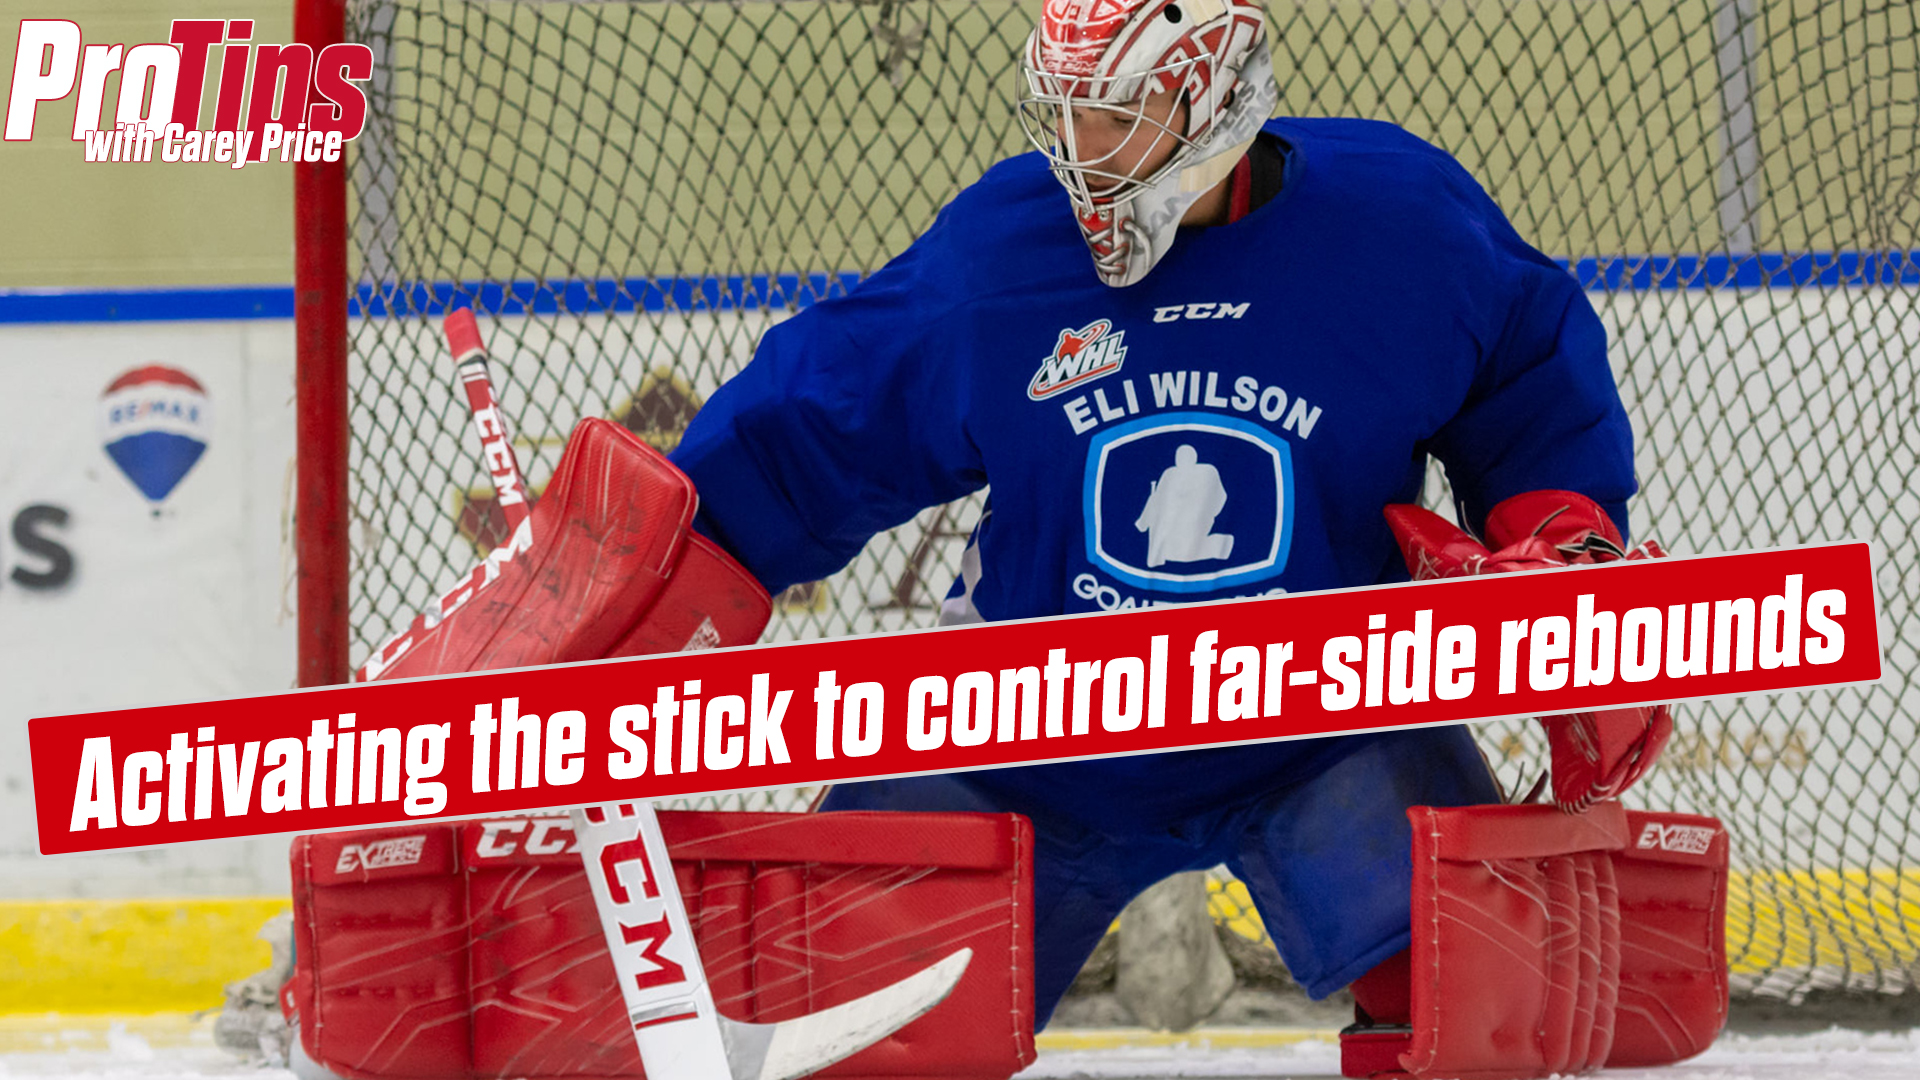 Pro Tips with Carey Price